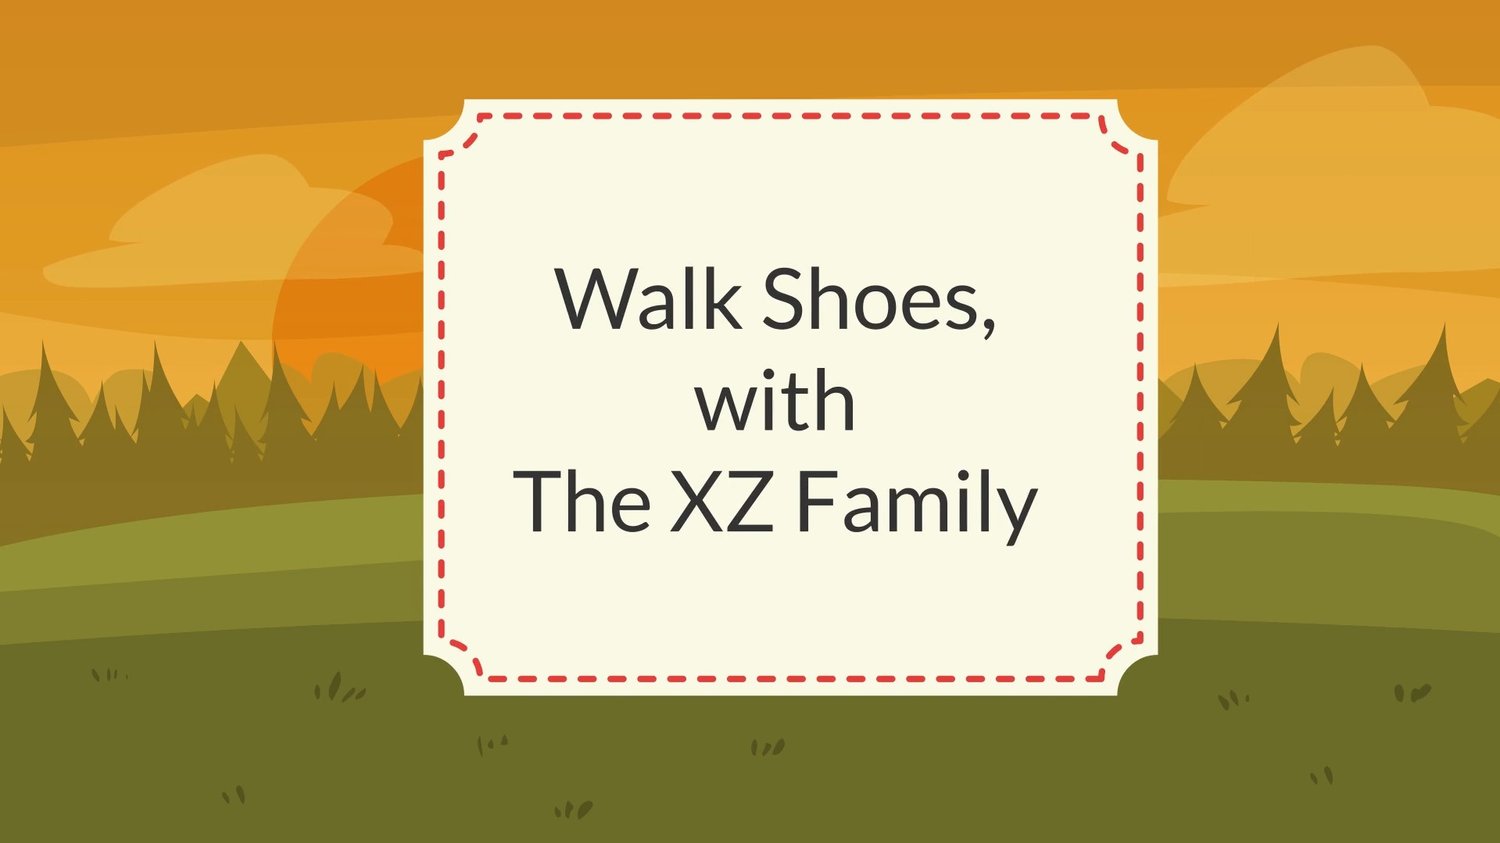 Walk+Shoes+with+the+XZ+Family